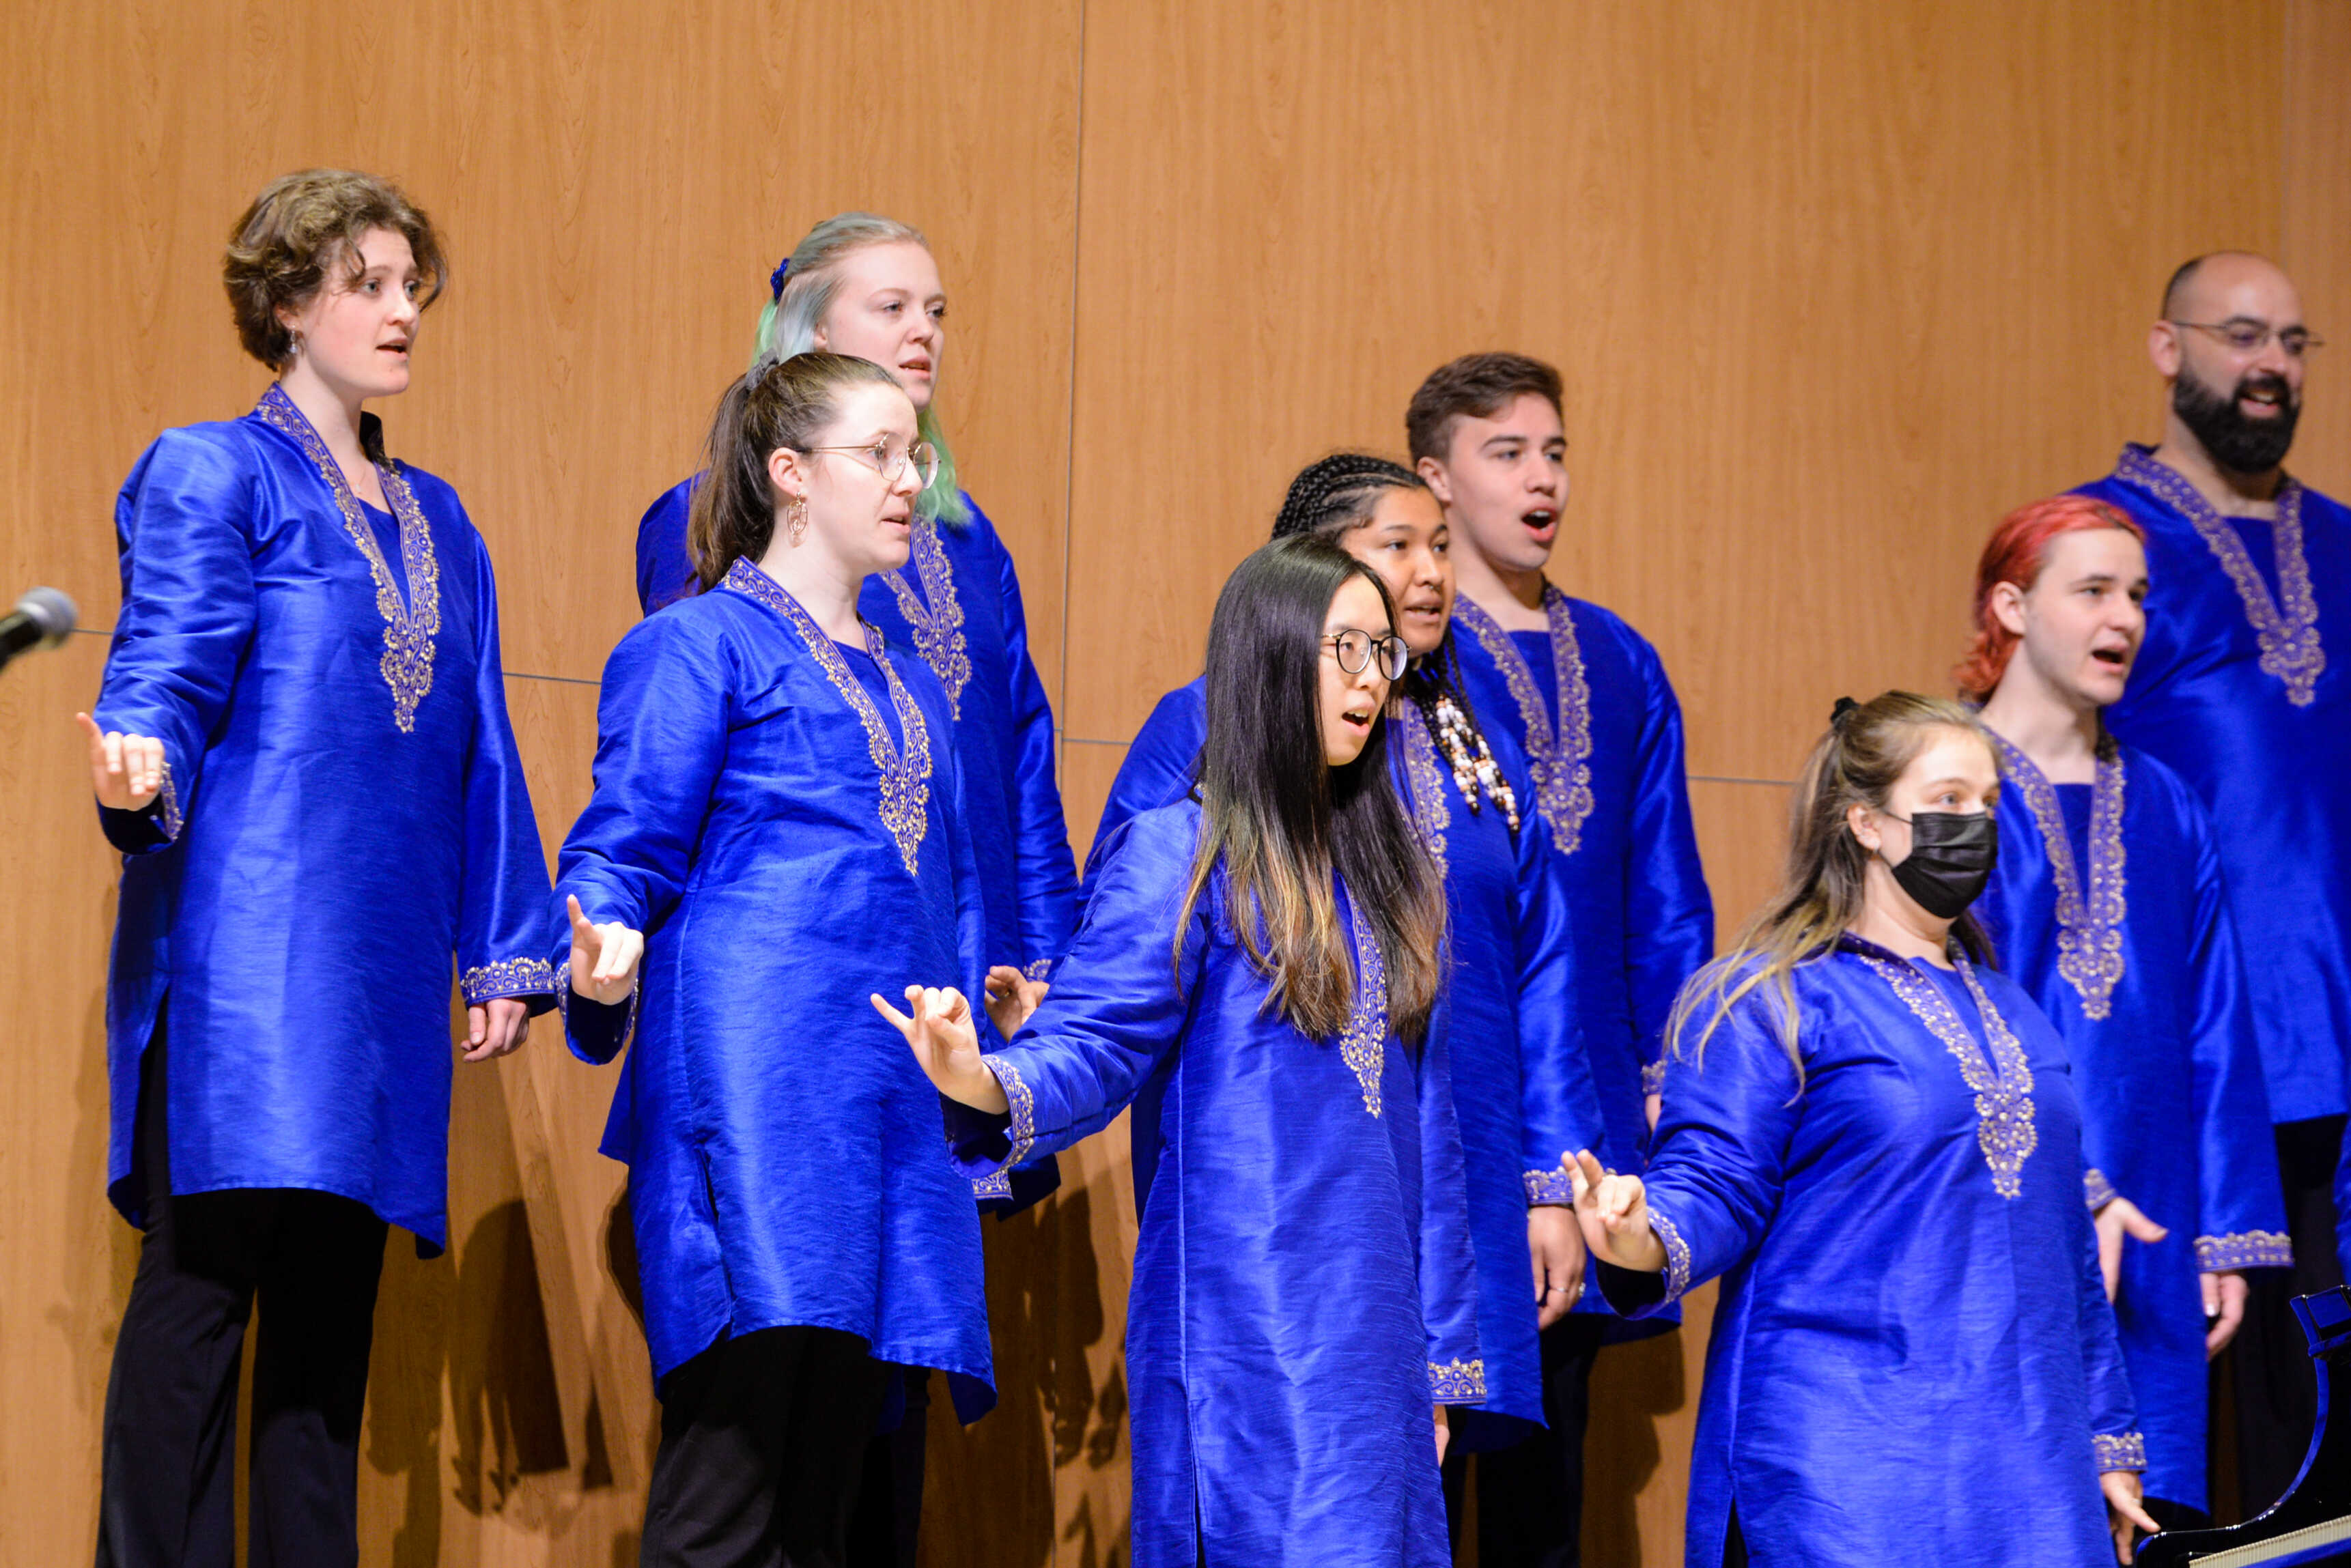 An Immersive Singing Experience in an Honor Choir Setting